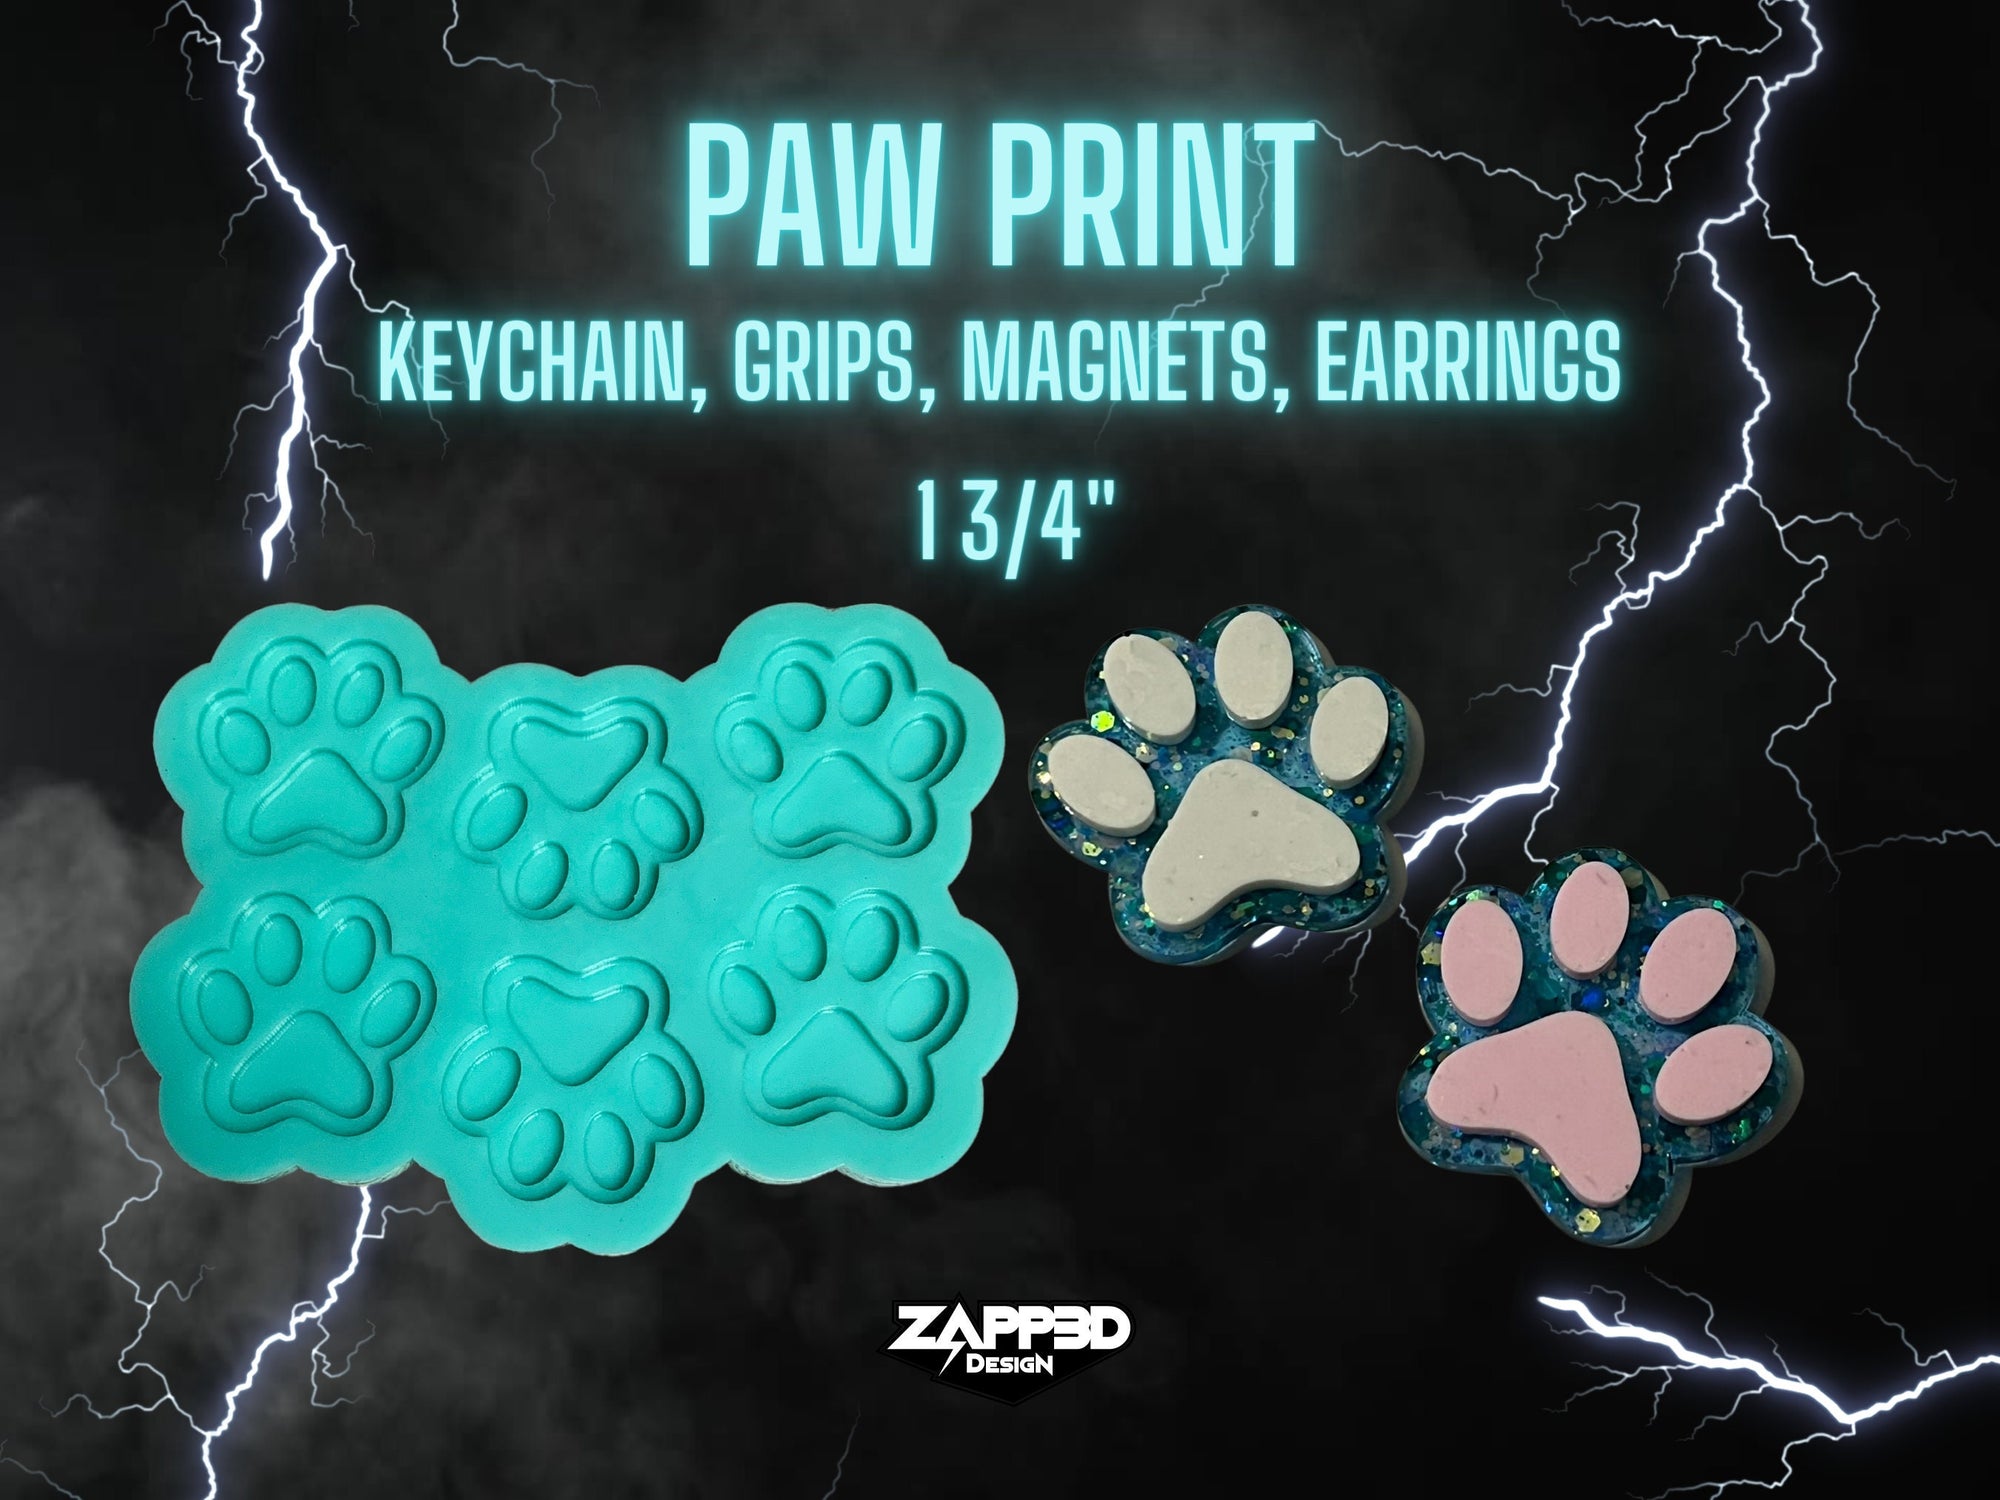 Paw Print Keychain Mold, Paw Print Mold, Dog Paw Mold, Cat Paw Mold, Phone Grip Mold, Magnet Mold